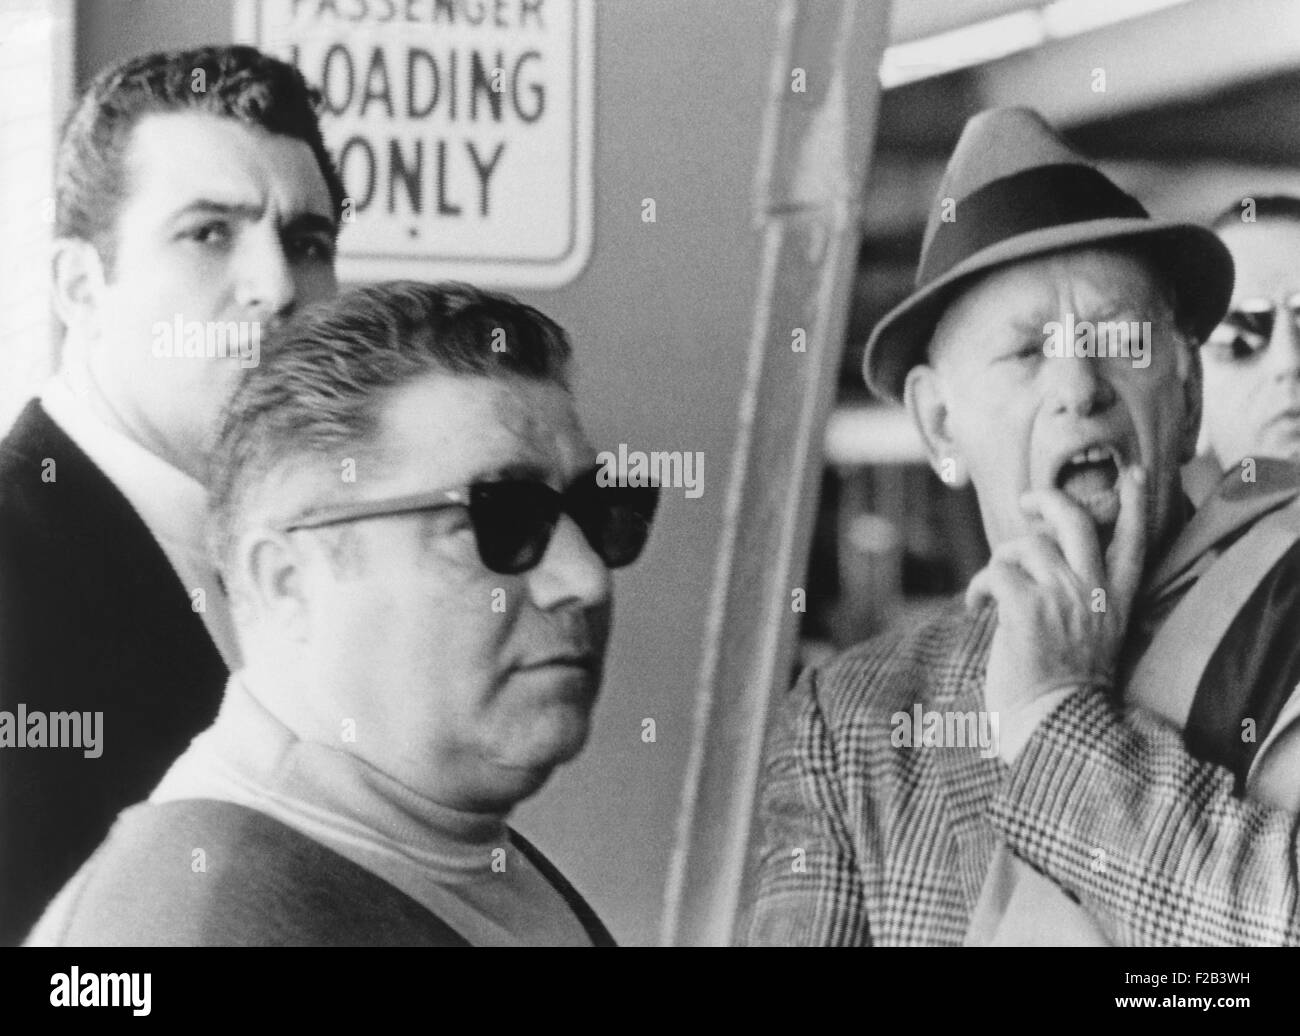 Reputed Mafia family were served with Federal subpoenas at Miami International Airport. L-R: Paul Silvio; Carl Civella with sunglasses; and his brother, Anthony Civella. March 1, 1969. - (CSU 2015 5 29) Stock Photo